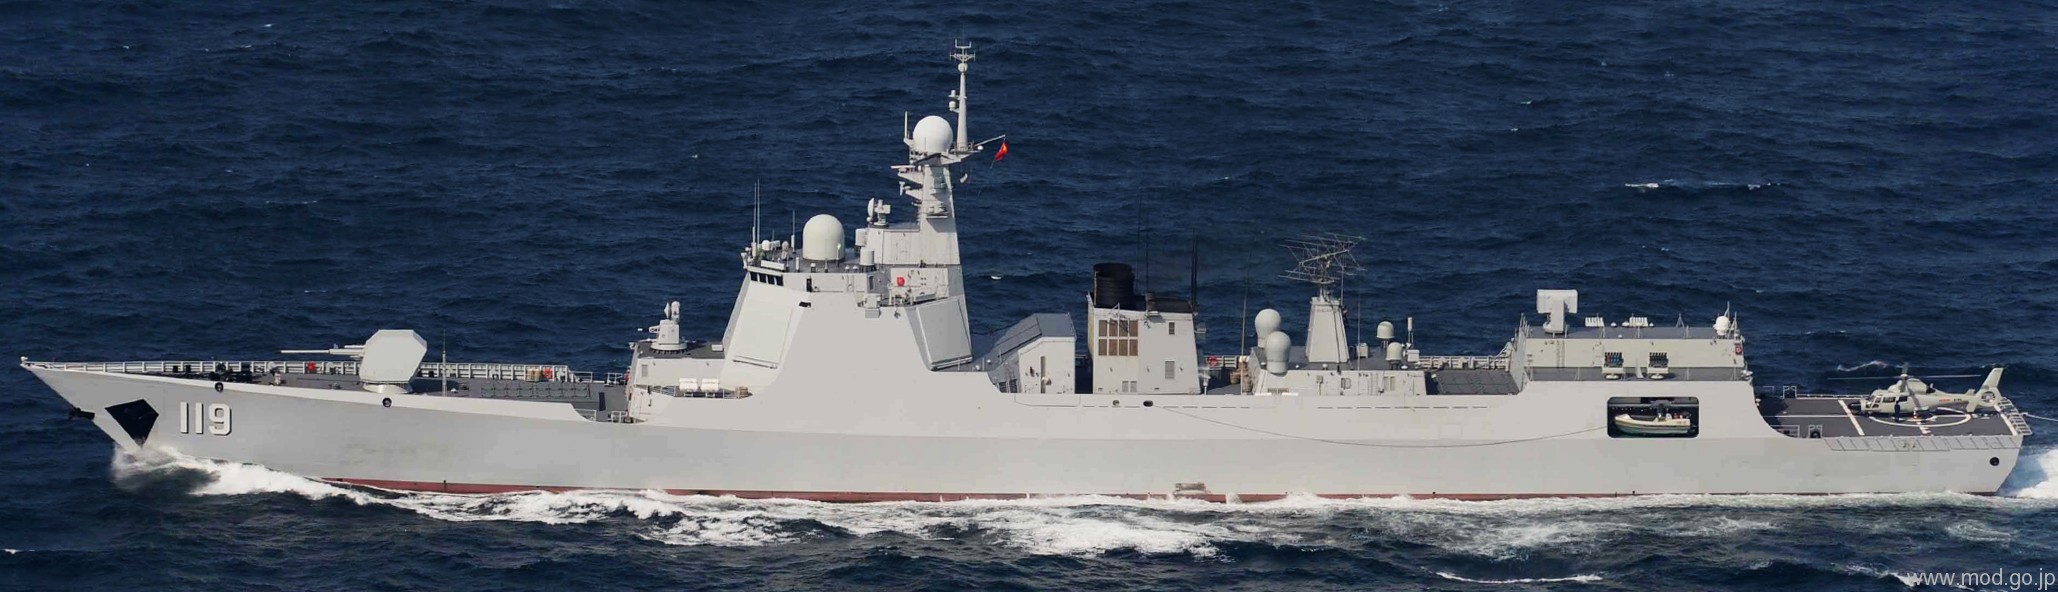 ddg-119 plans guiyang type 052d luyang class guided missile destroyer ddg china people's liberation army navy 02